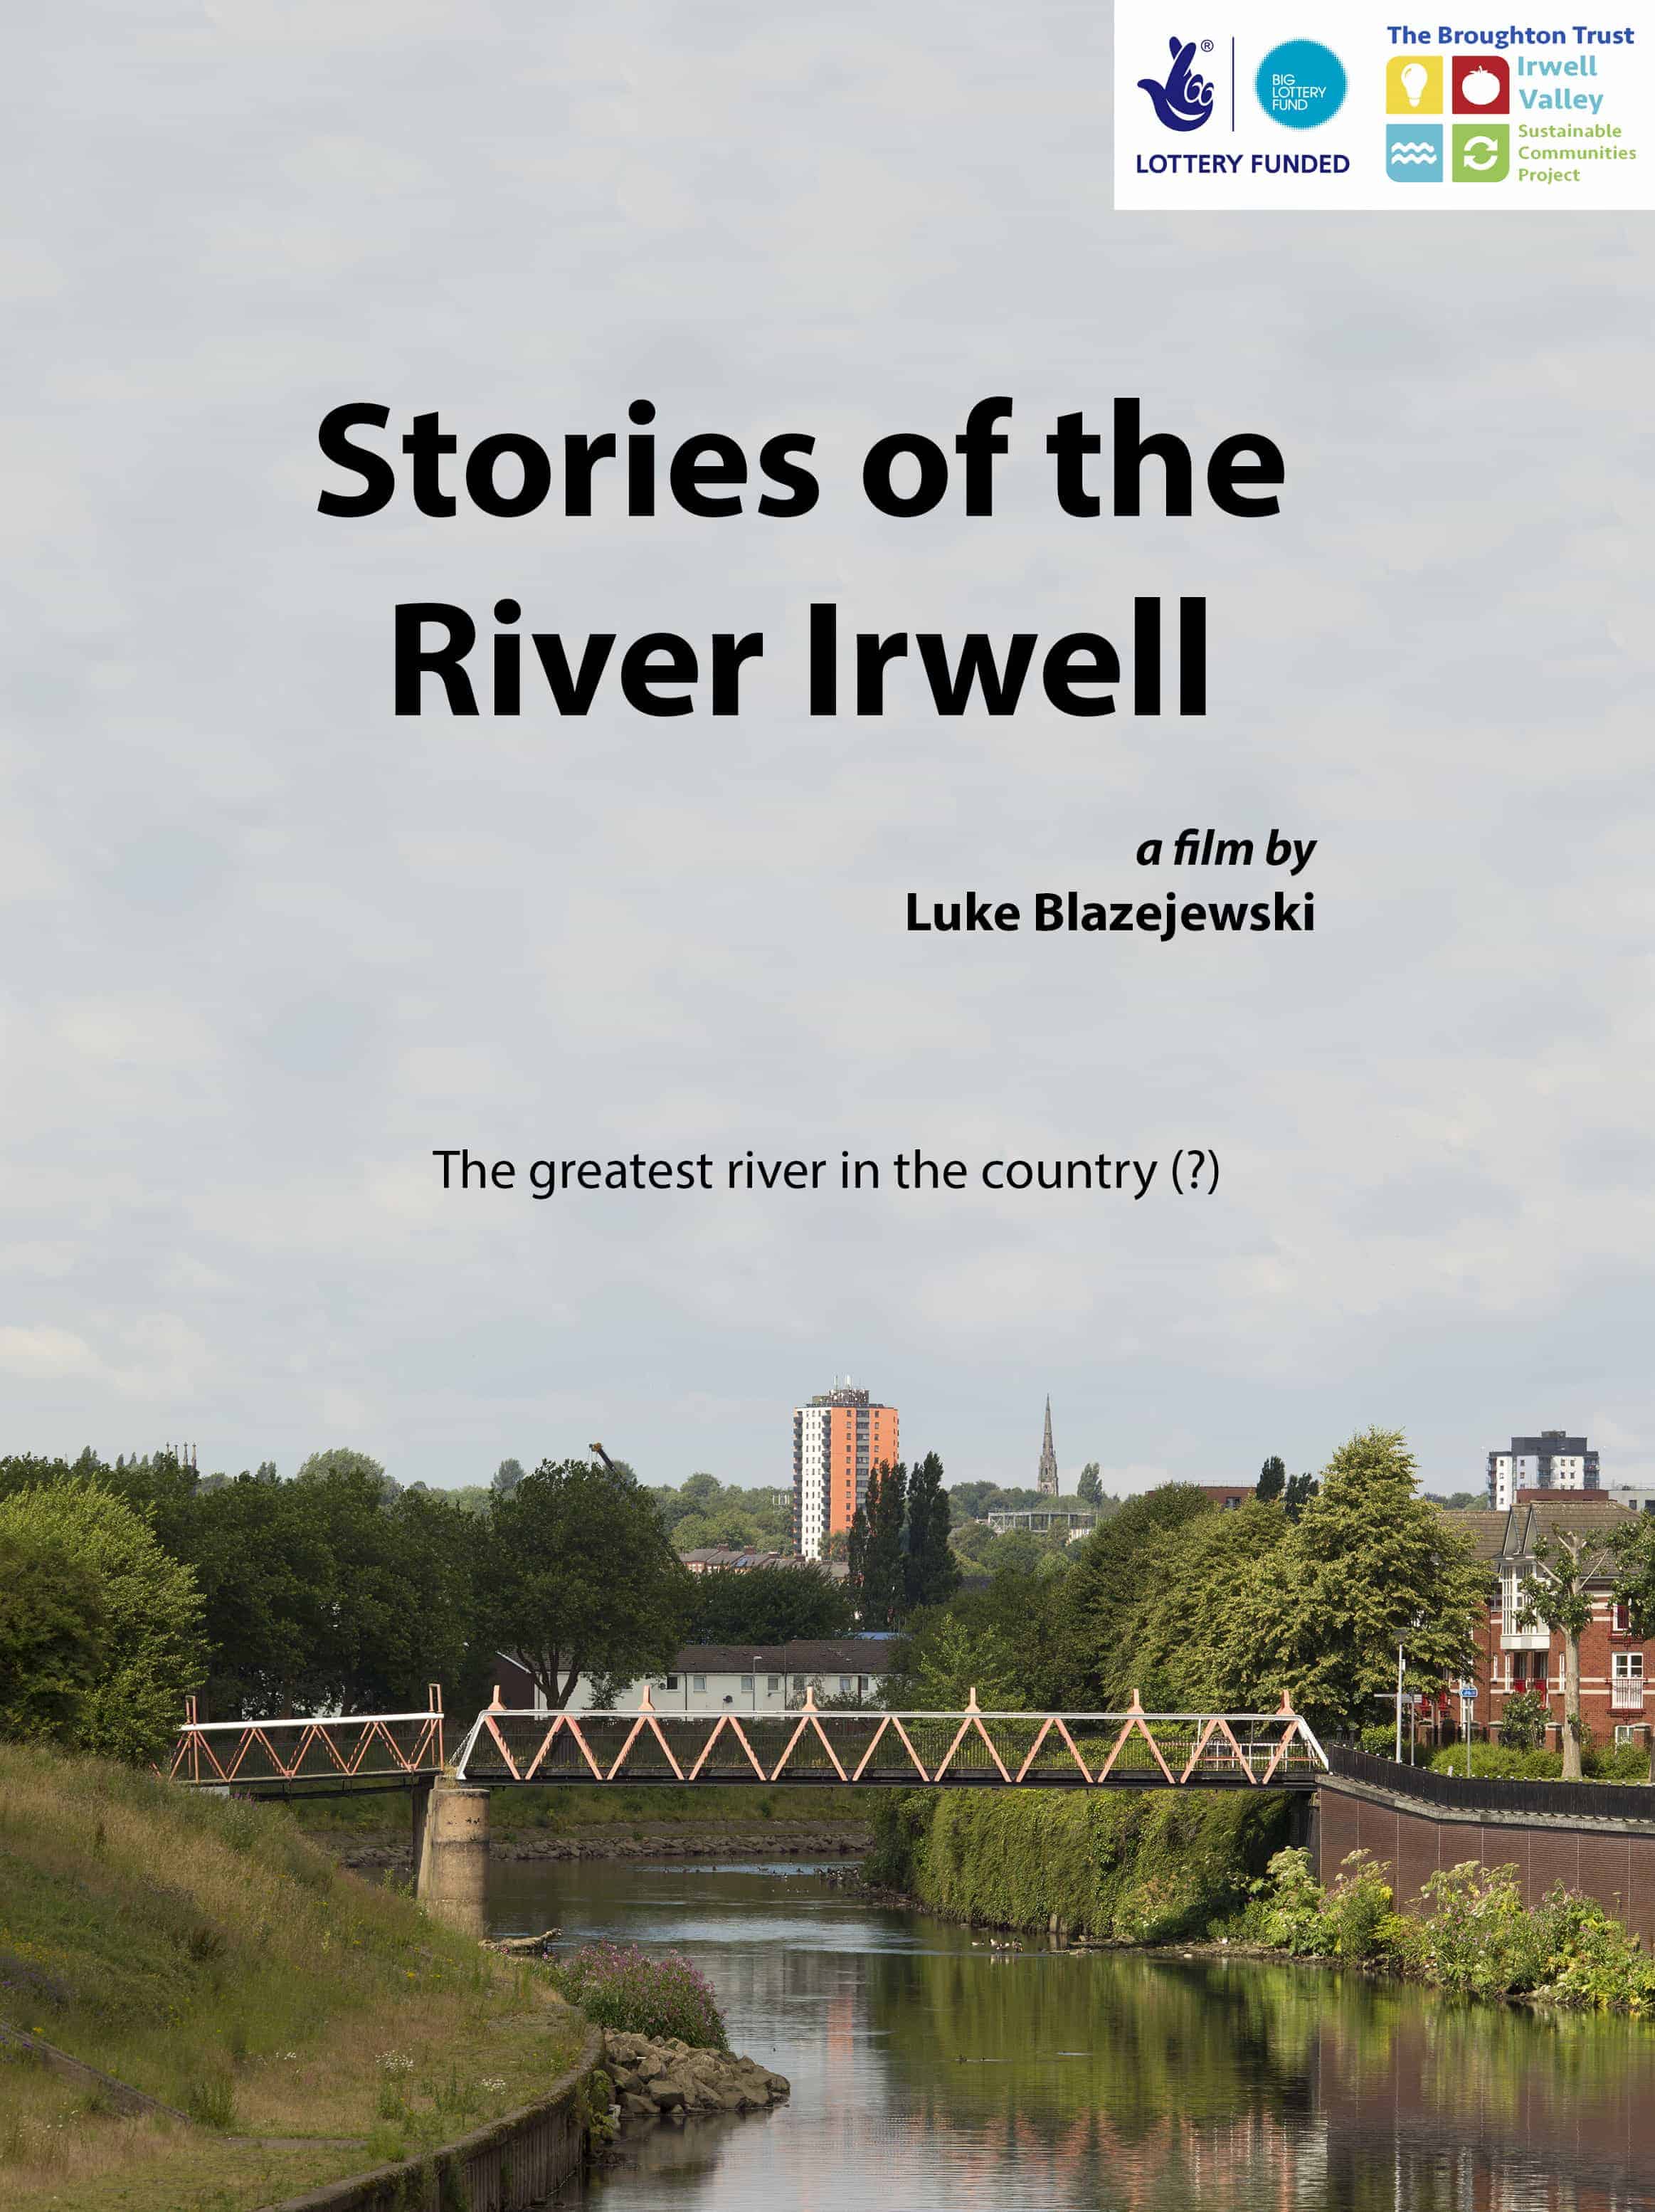 Stories of the River Irwell